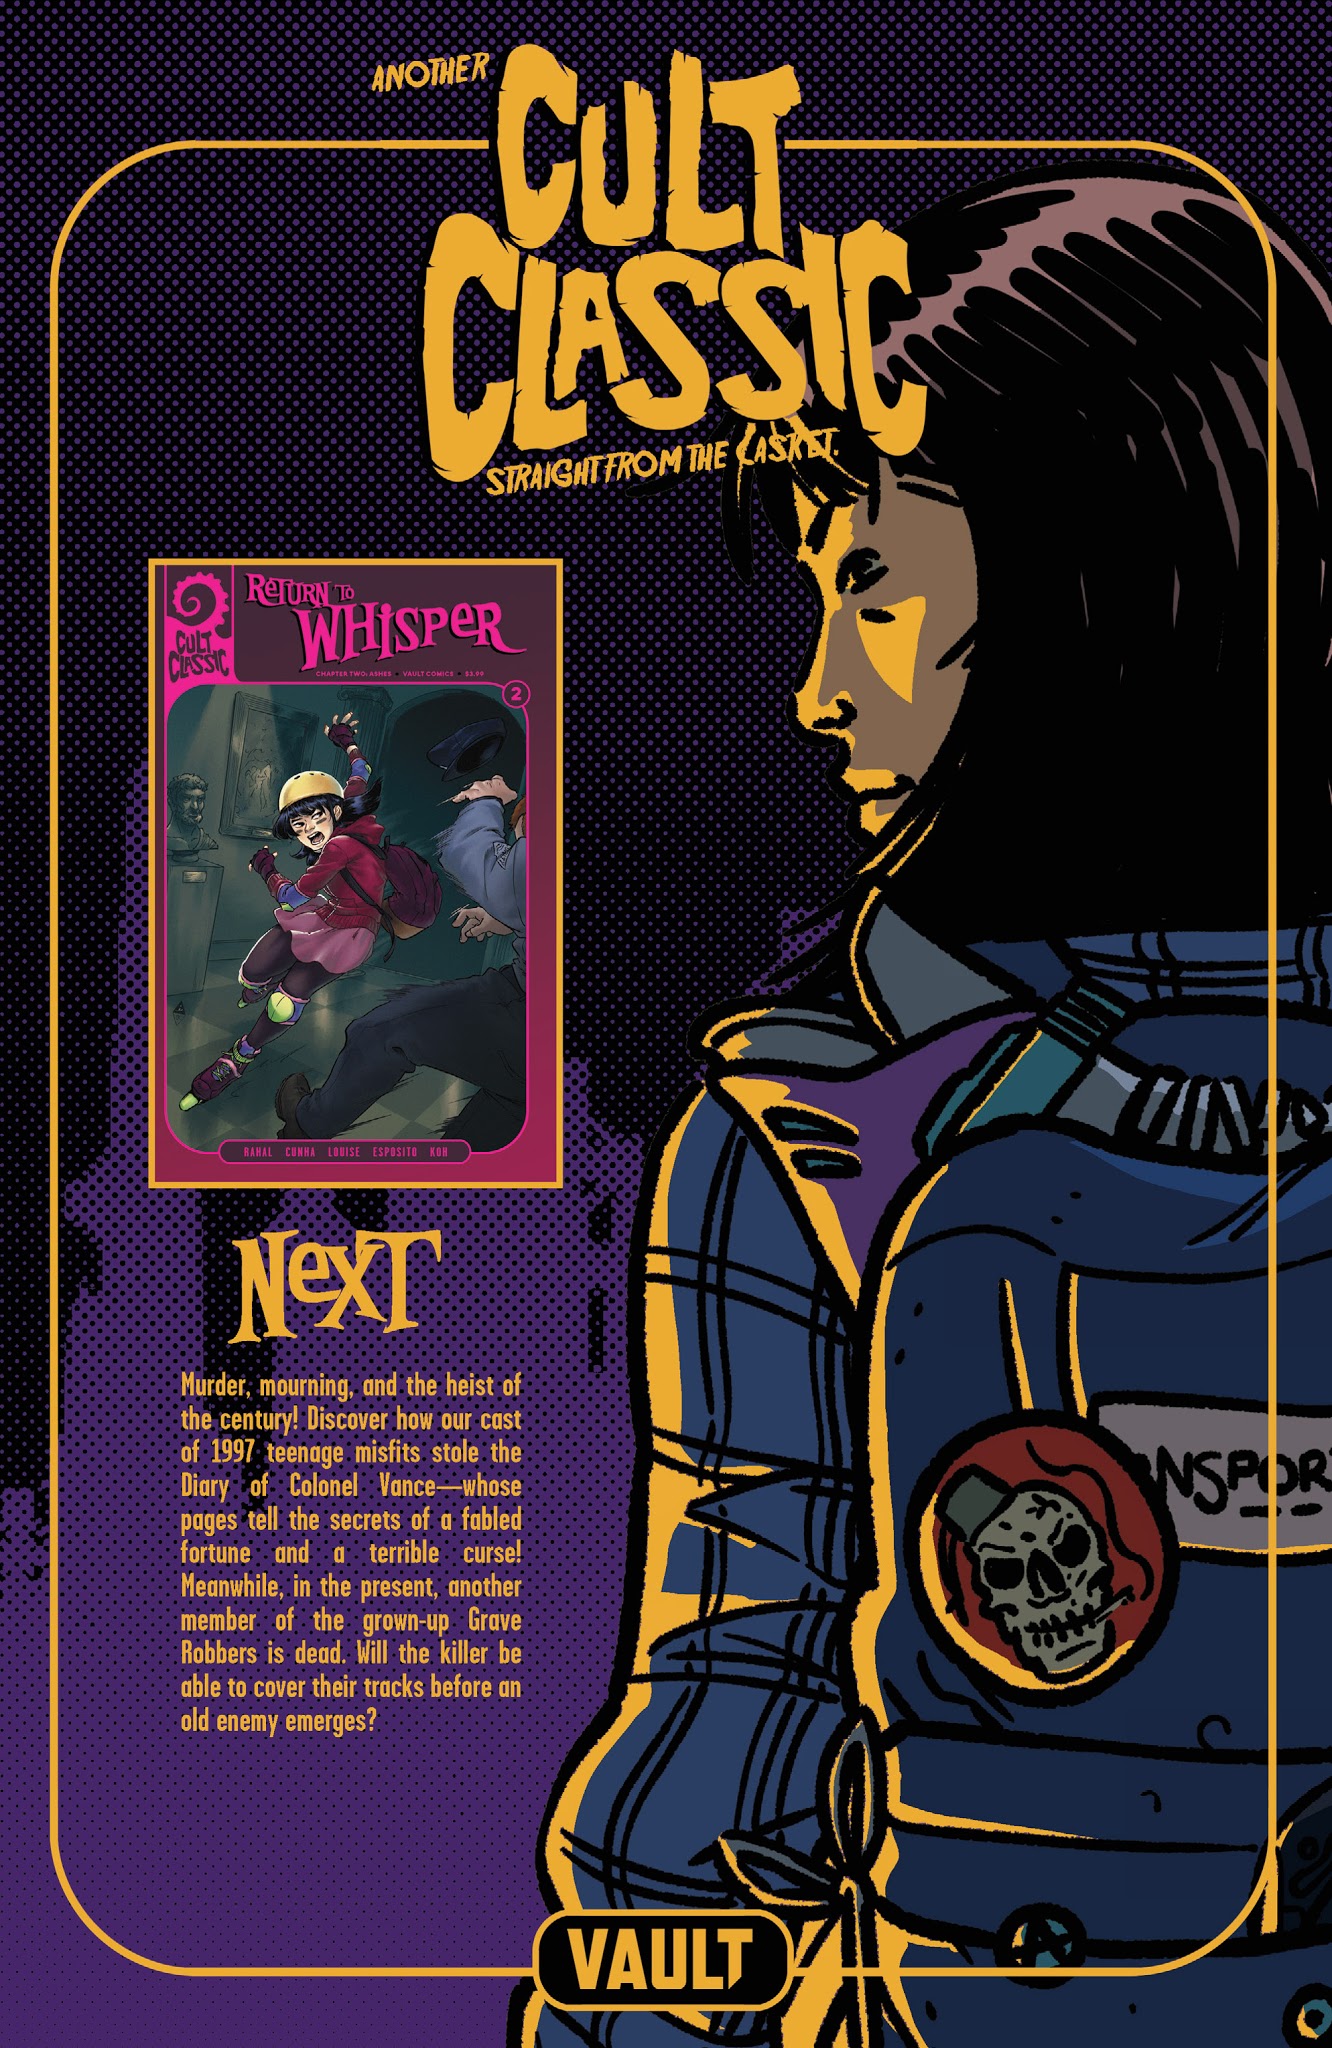 Read online Cult Classic: Return to Whisper comic -  Issue #1 - 24